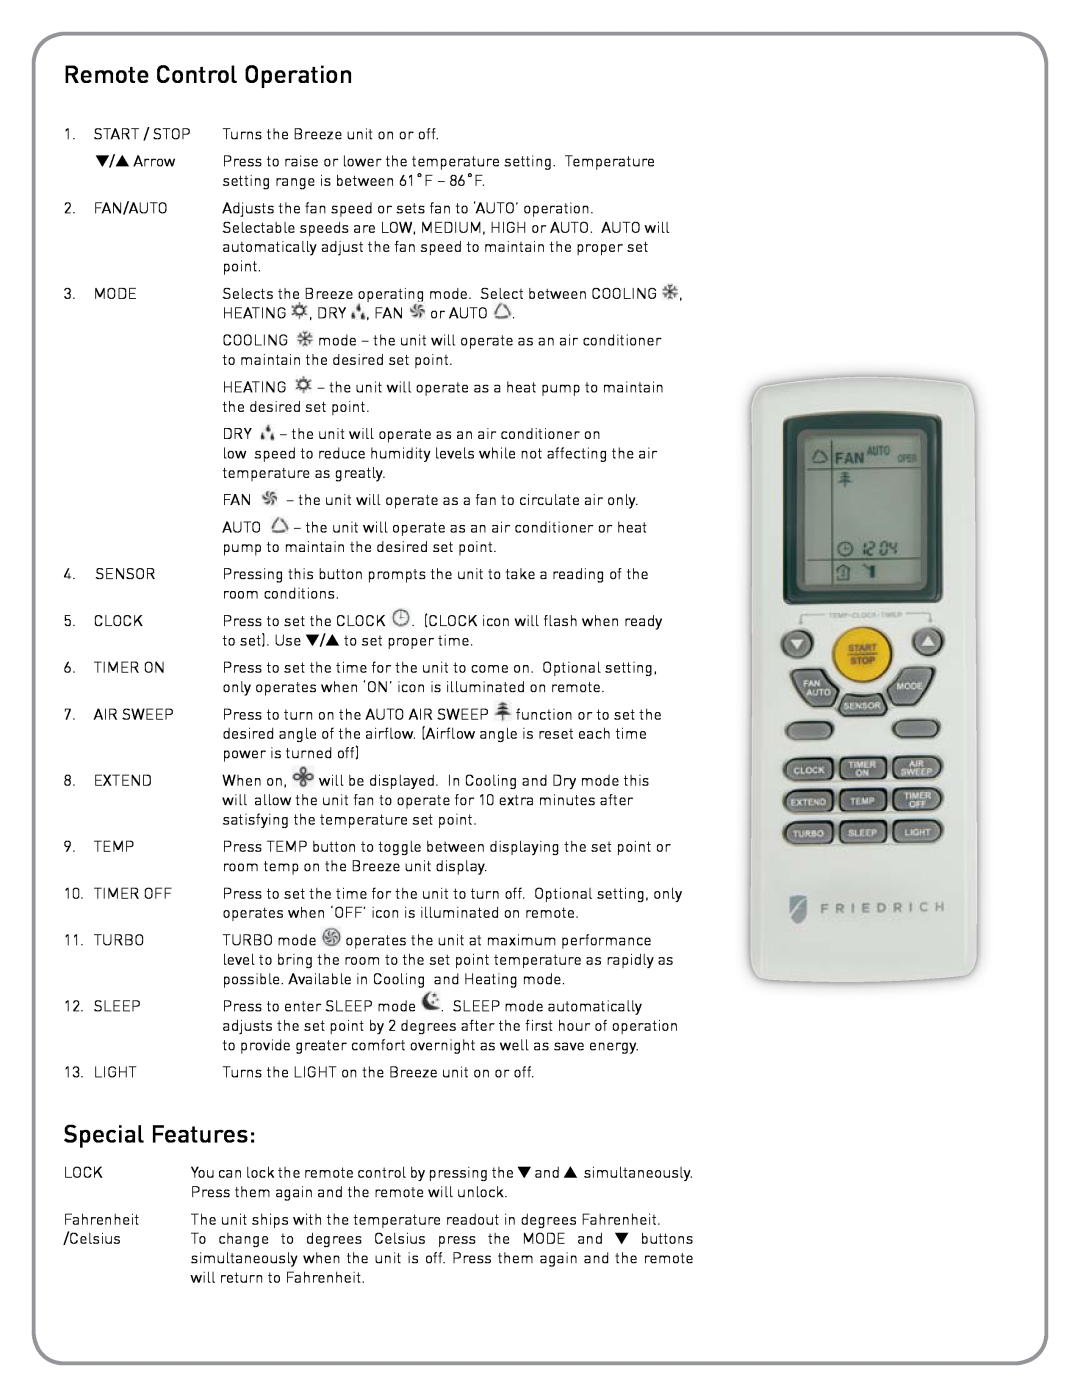 Friedrich BR1224W3A, Breeze installation instructions Remote Control Operation, Special Features 